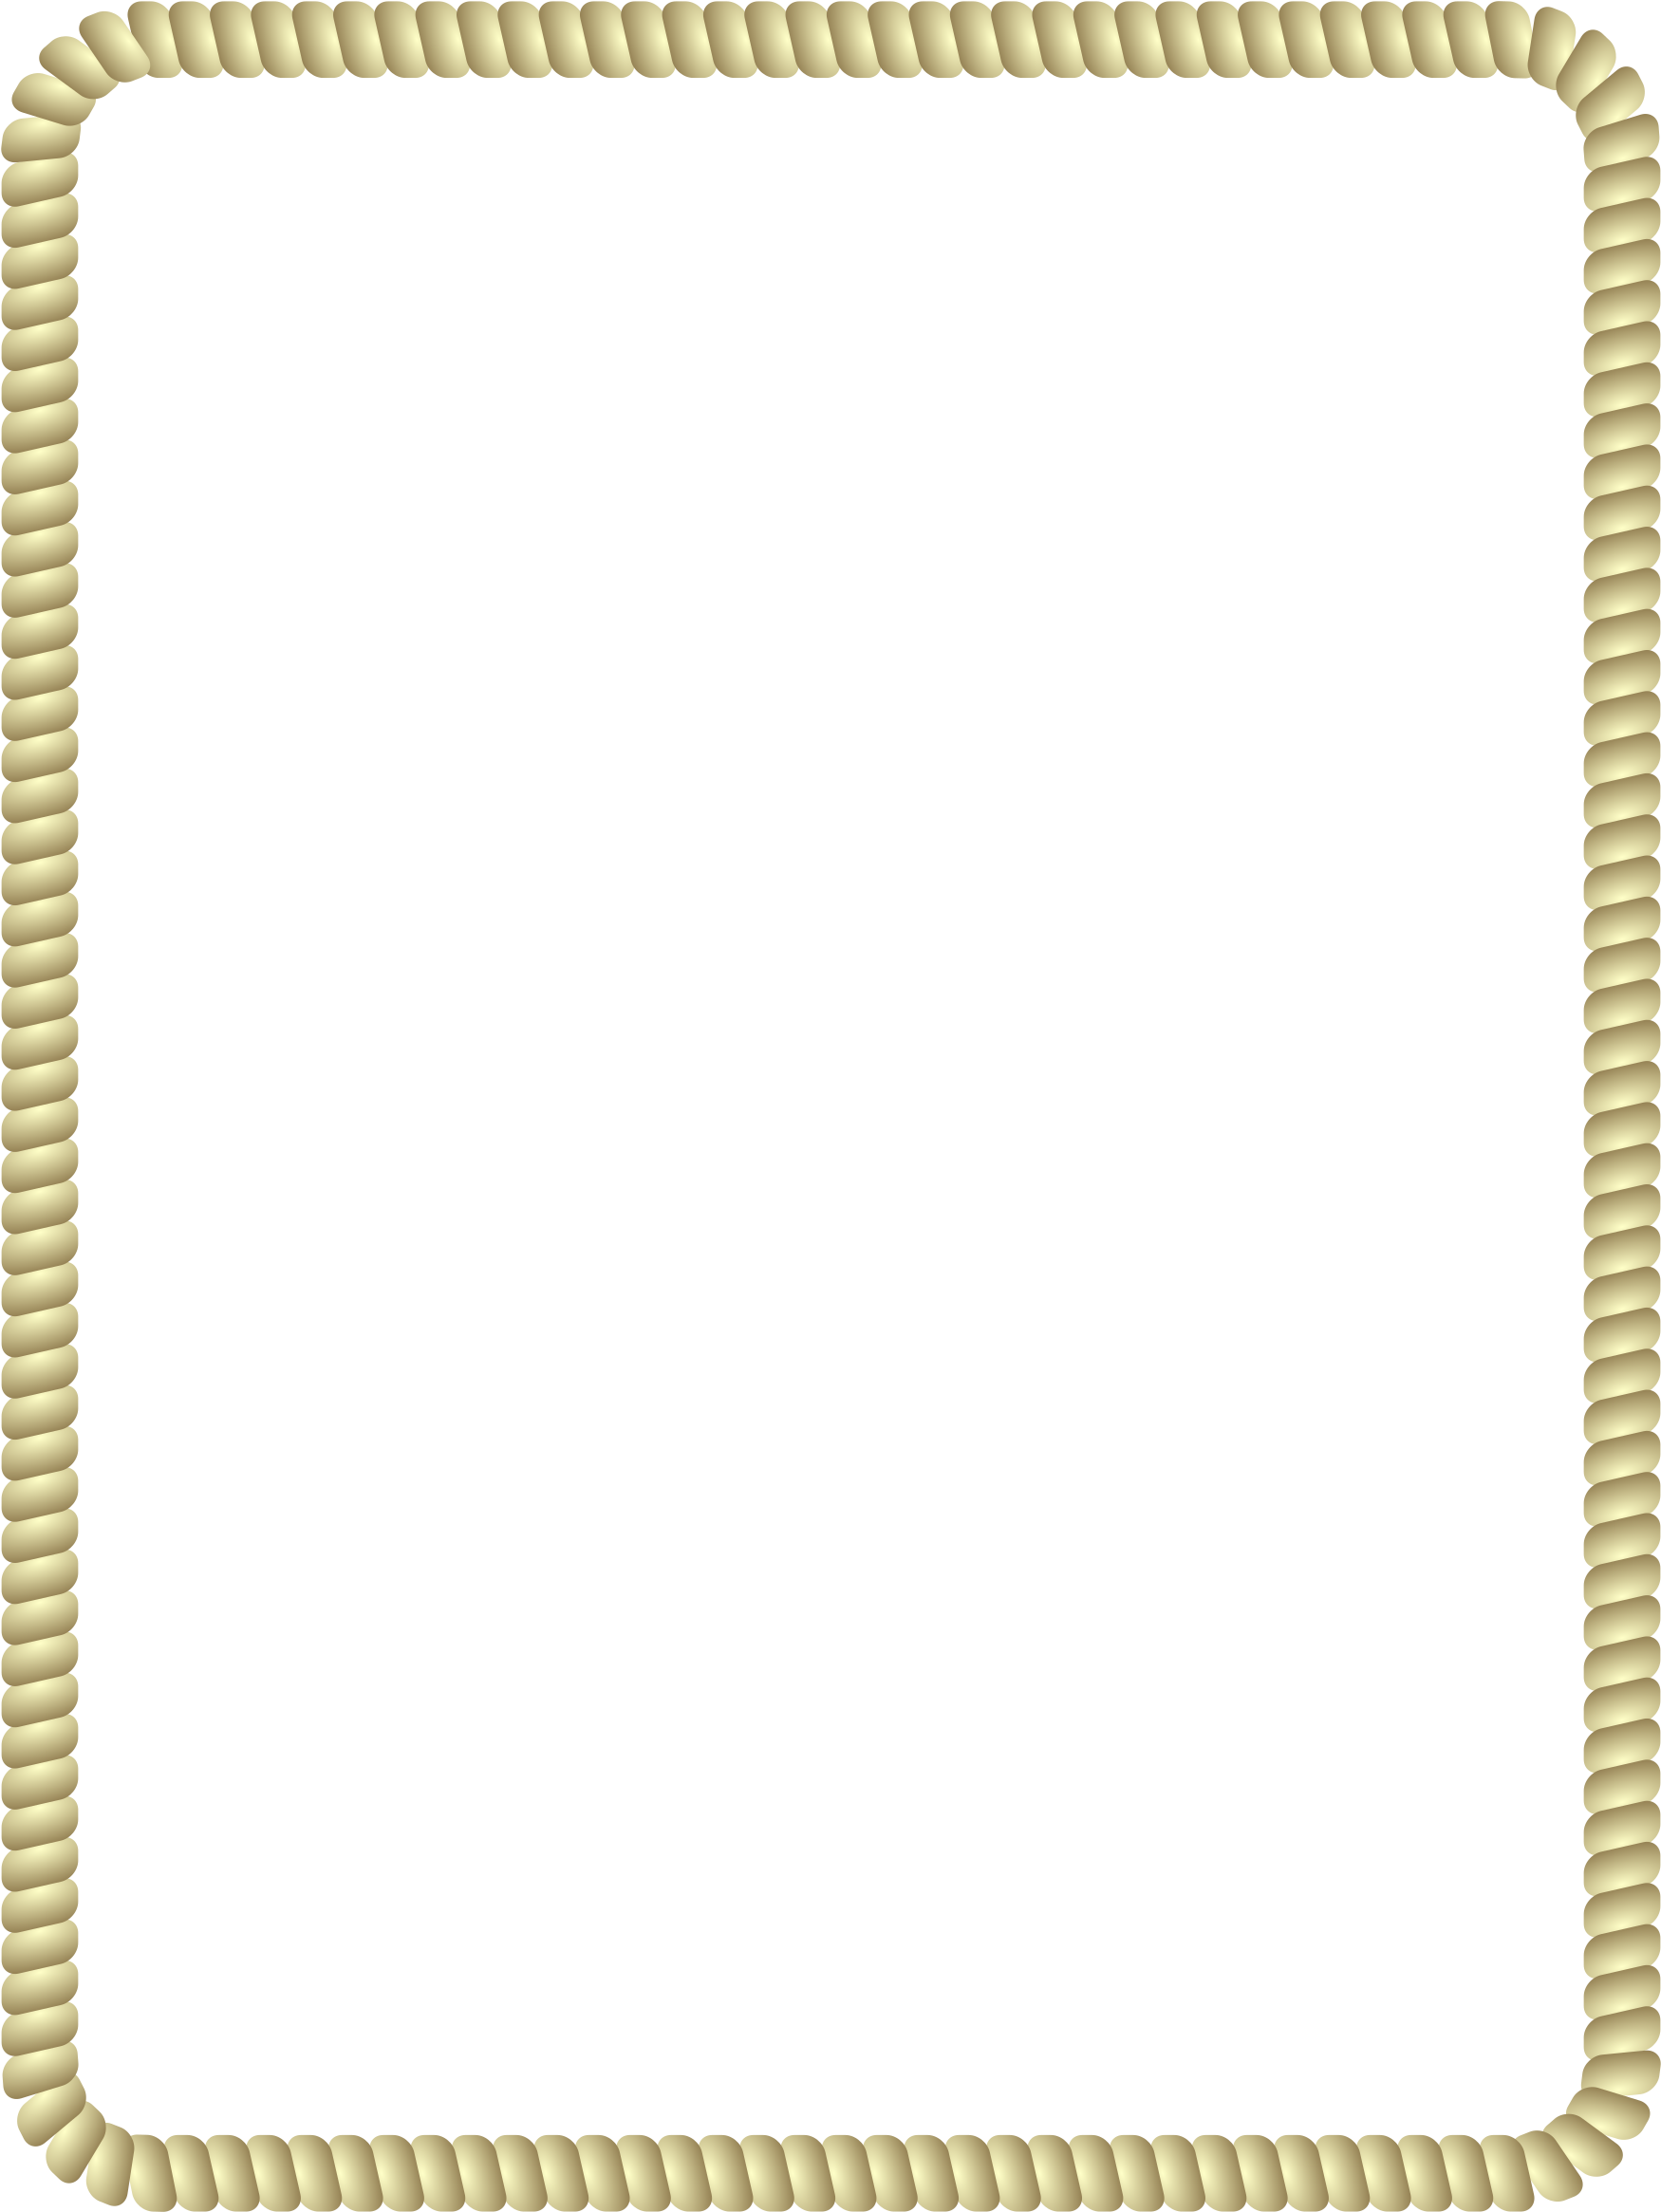 A Rectangular Frame With A Black Background